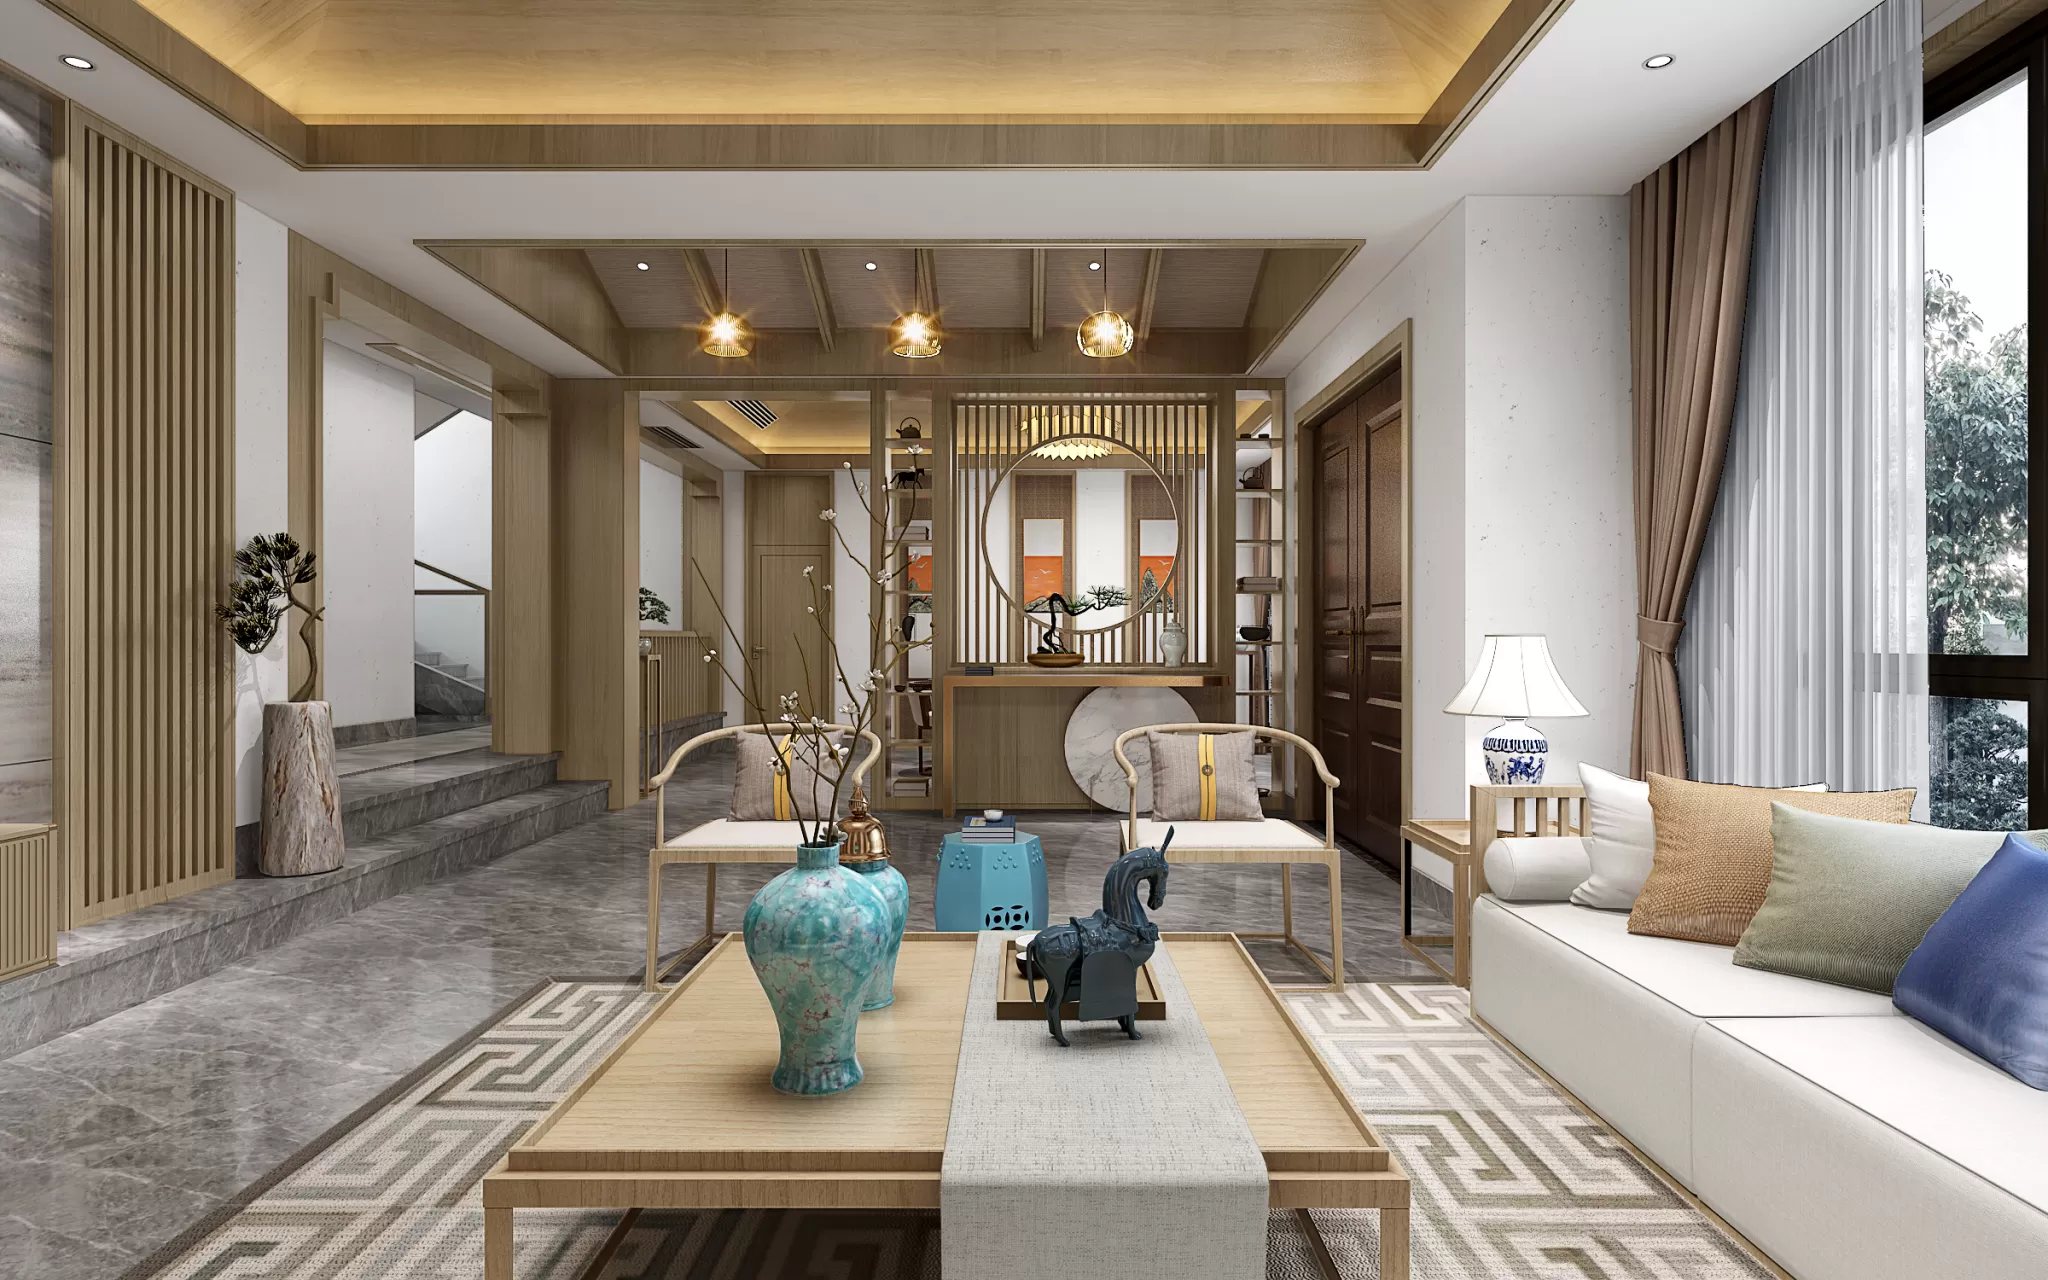 DESMOD INTERIOR 2021 (VRAY) – 4. LIVING ROOM – CHINESE – 021